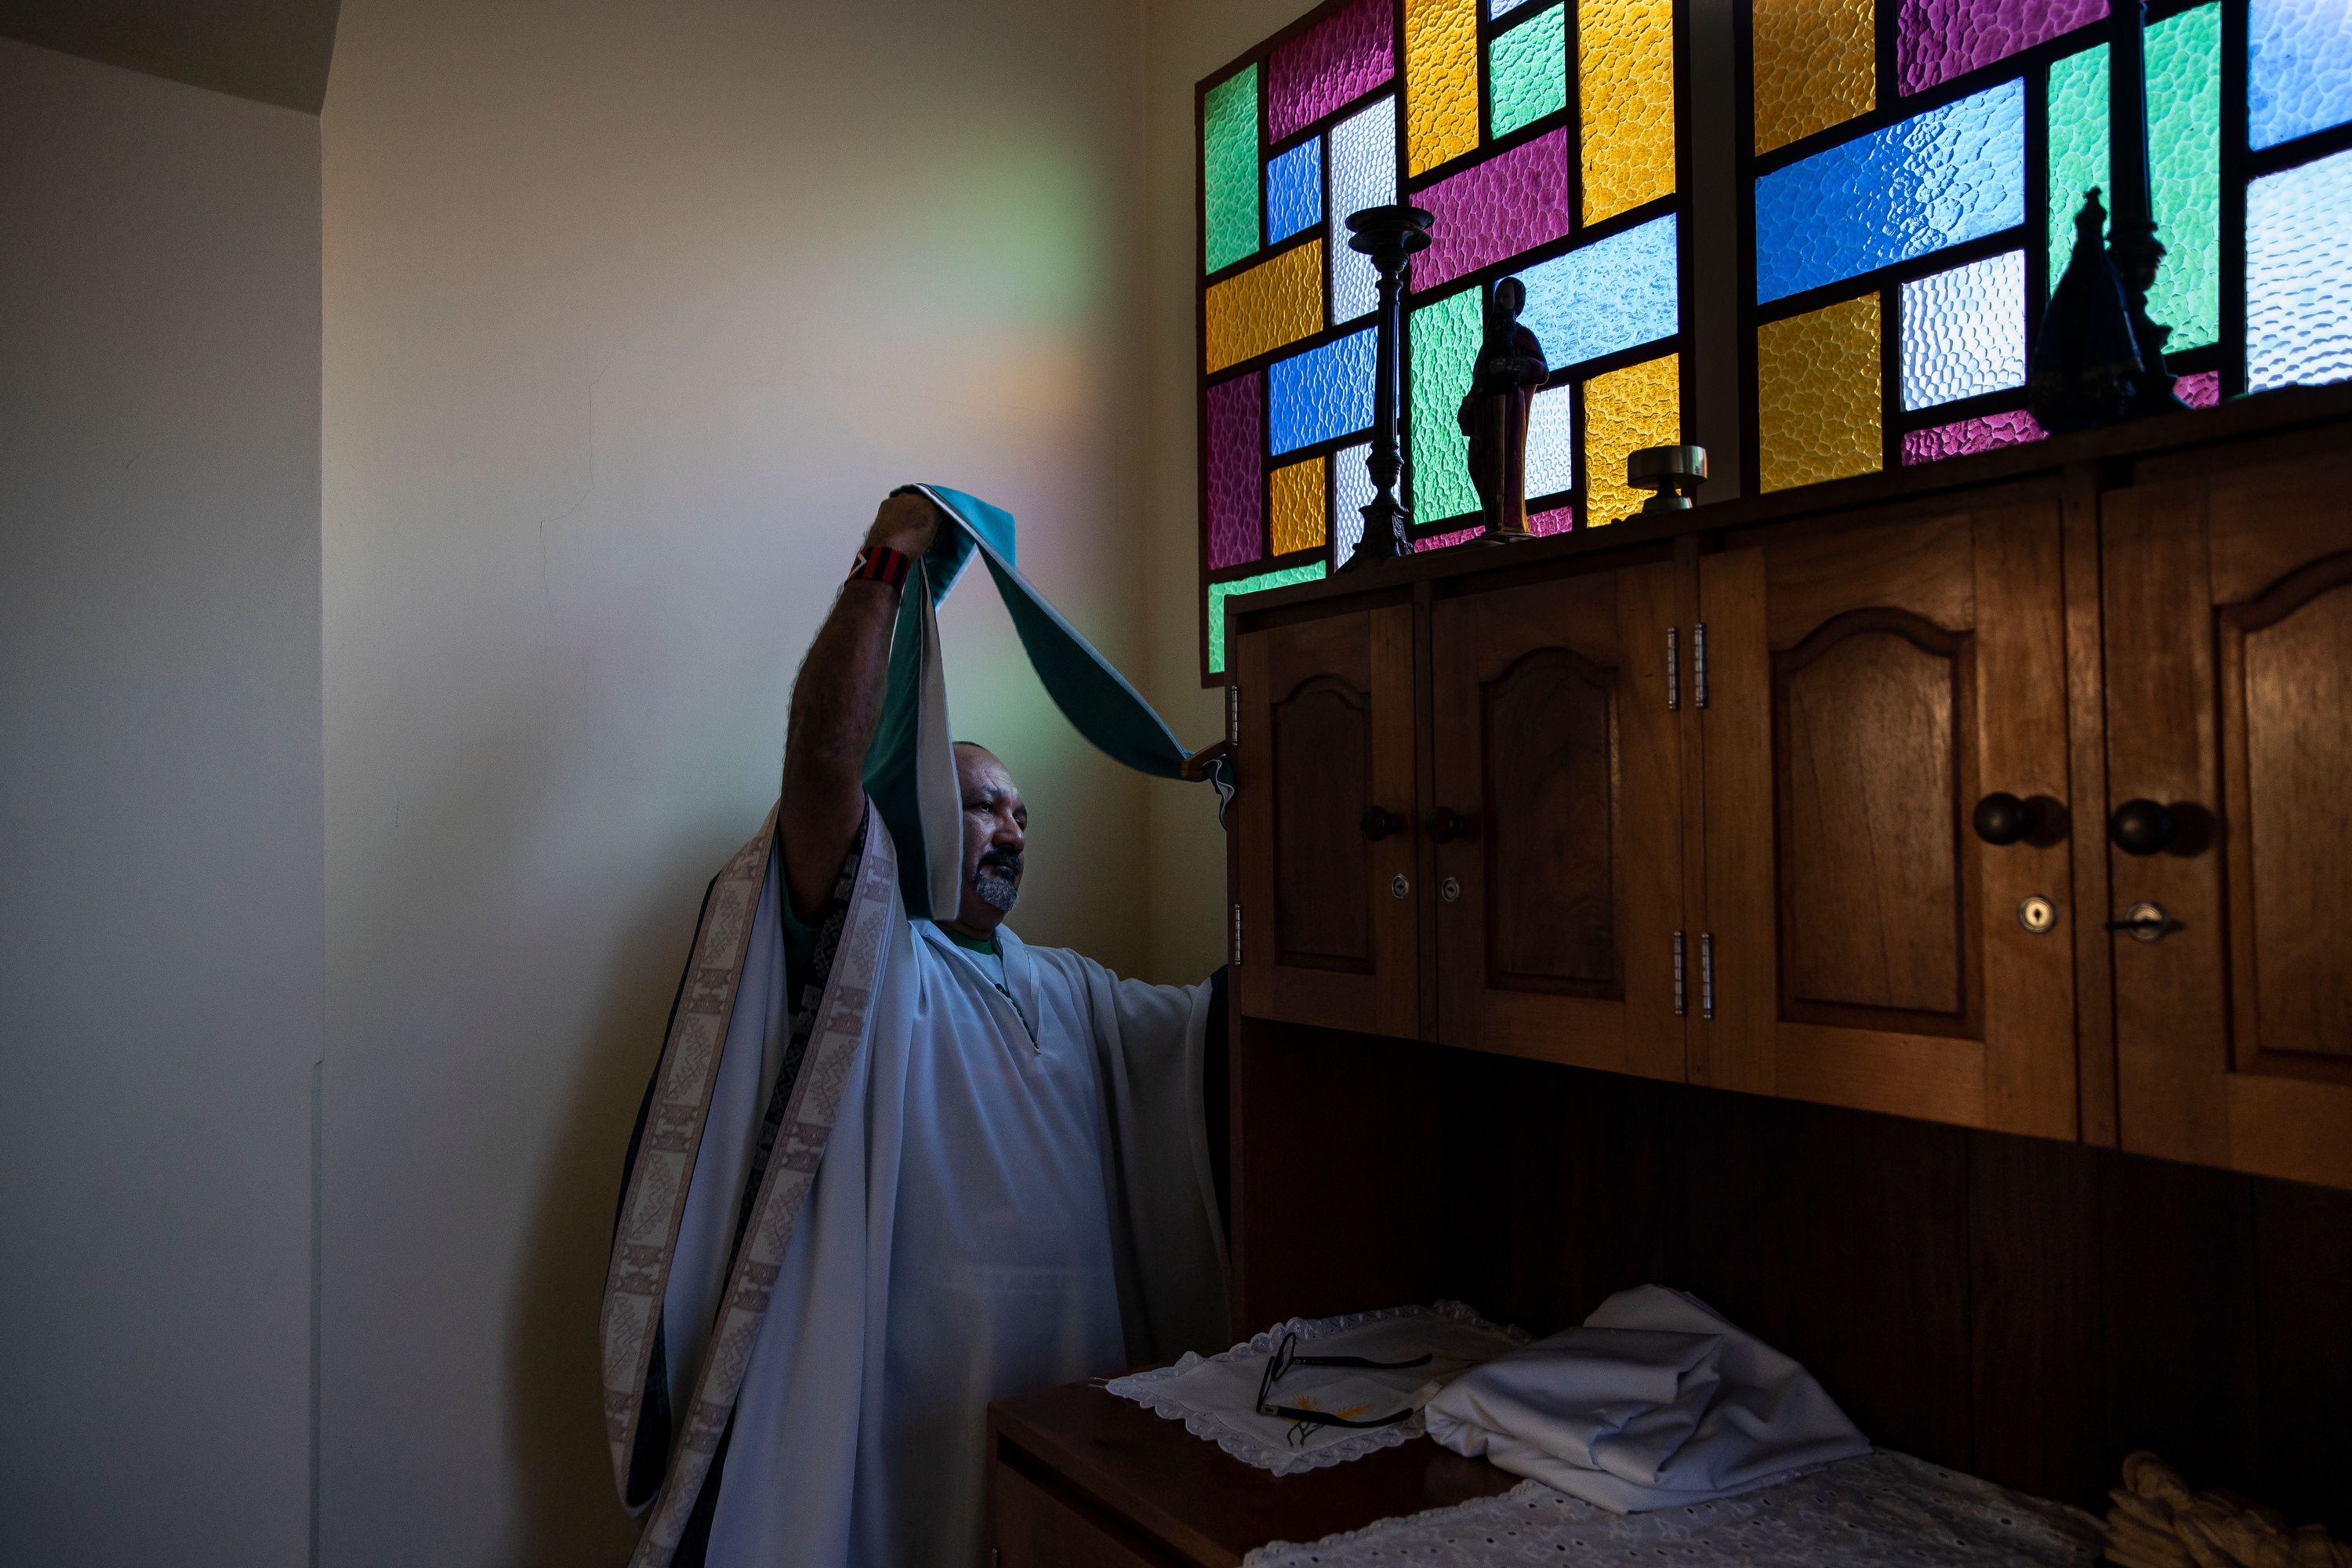 Father Amaro Lopes prepares to celebrate a mass in a chapel at the bishop’s house in Altamira. Image by Spenser Heaps. Brazil, 2019.